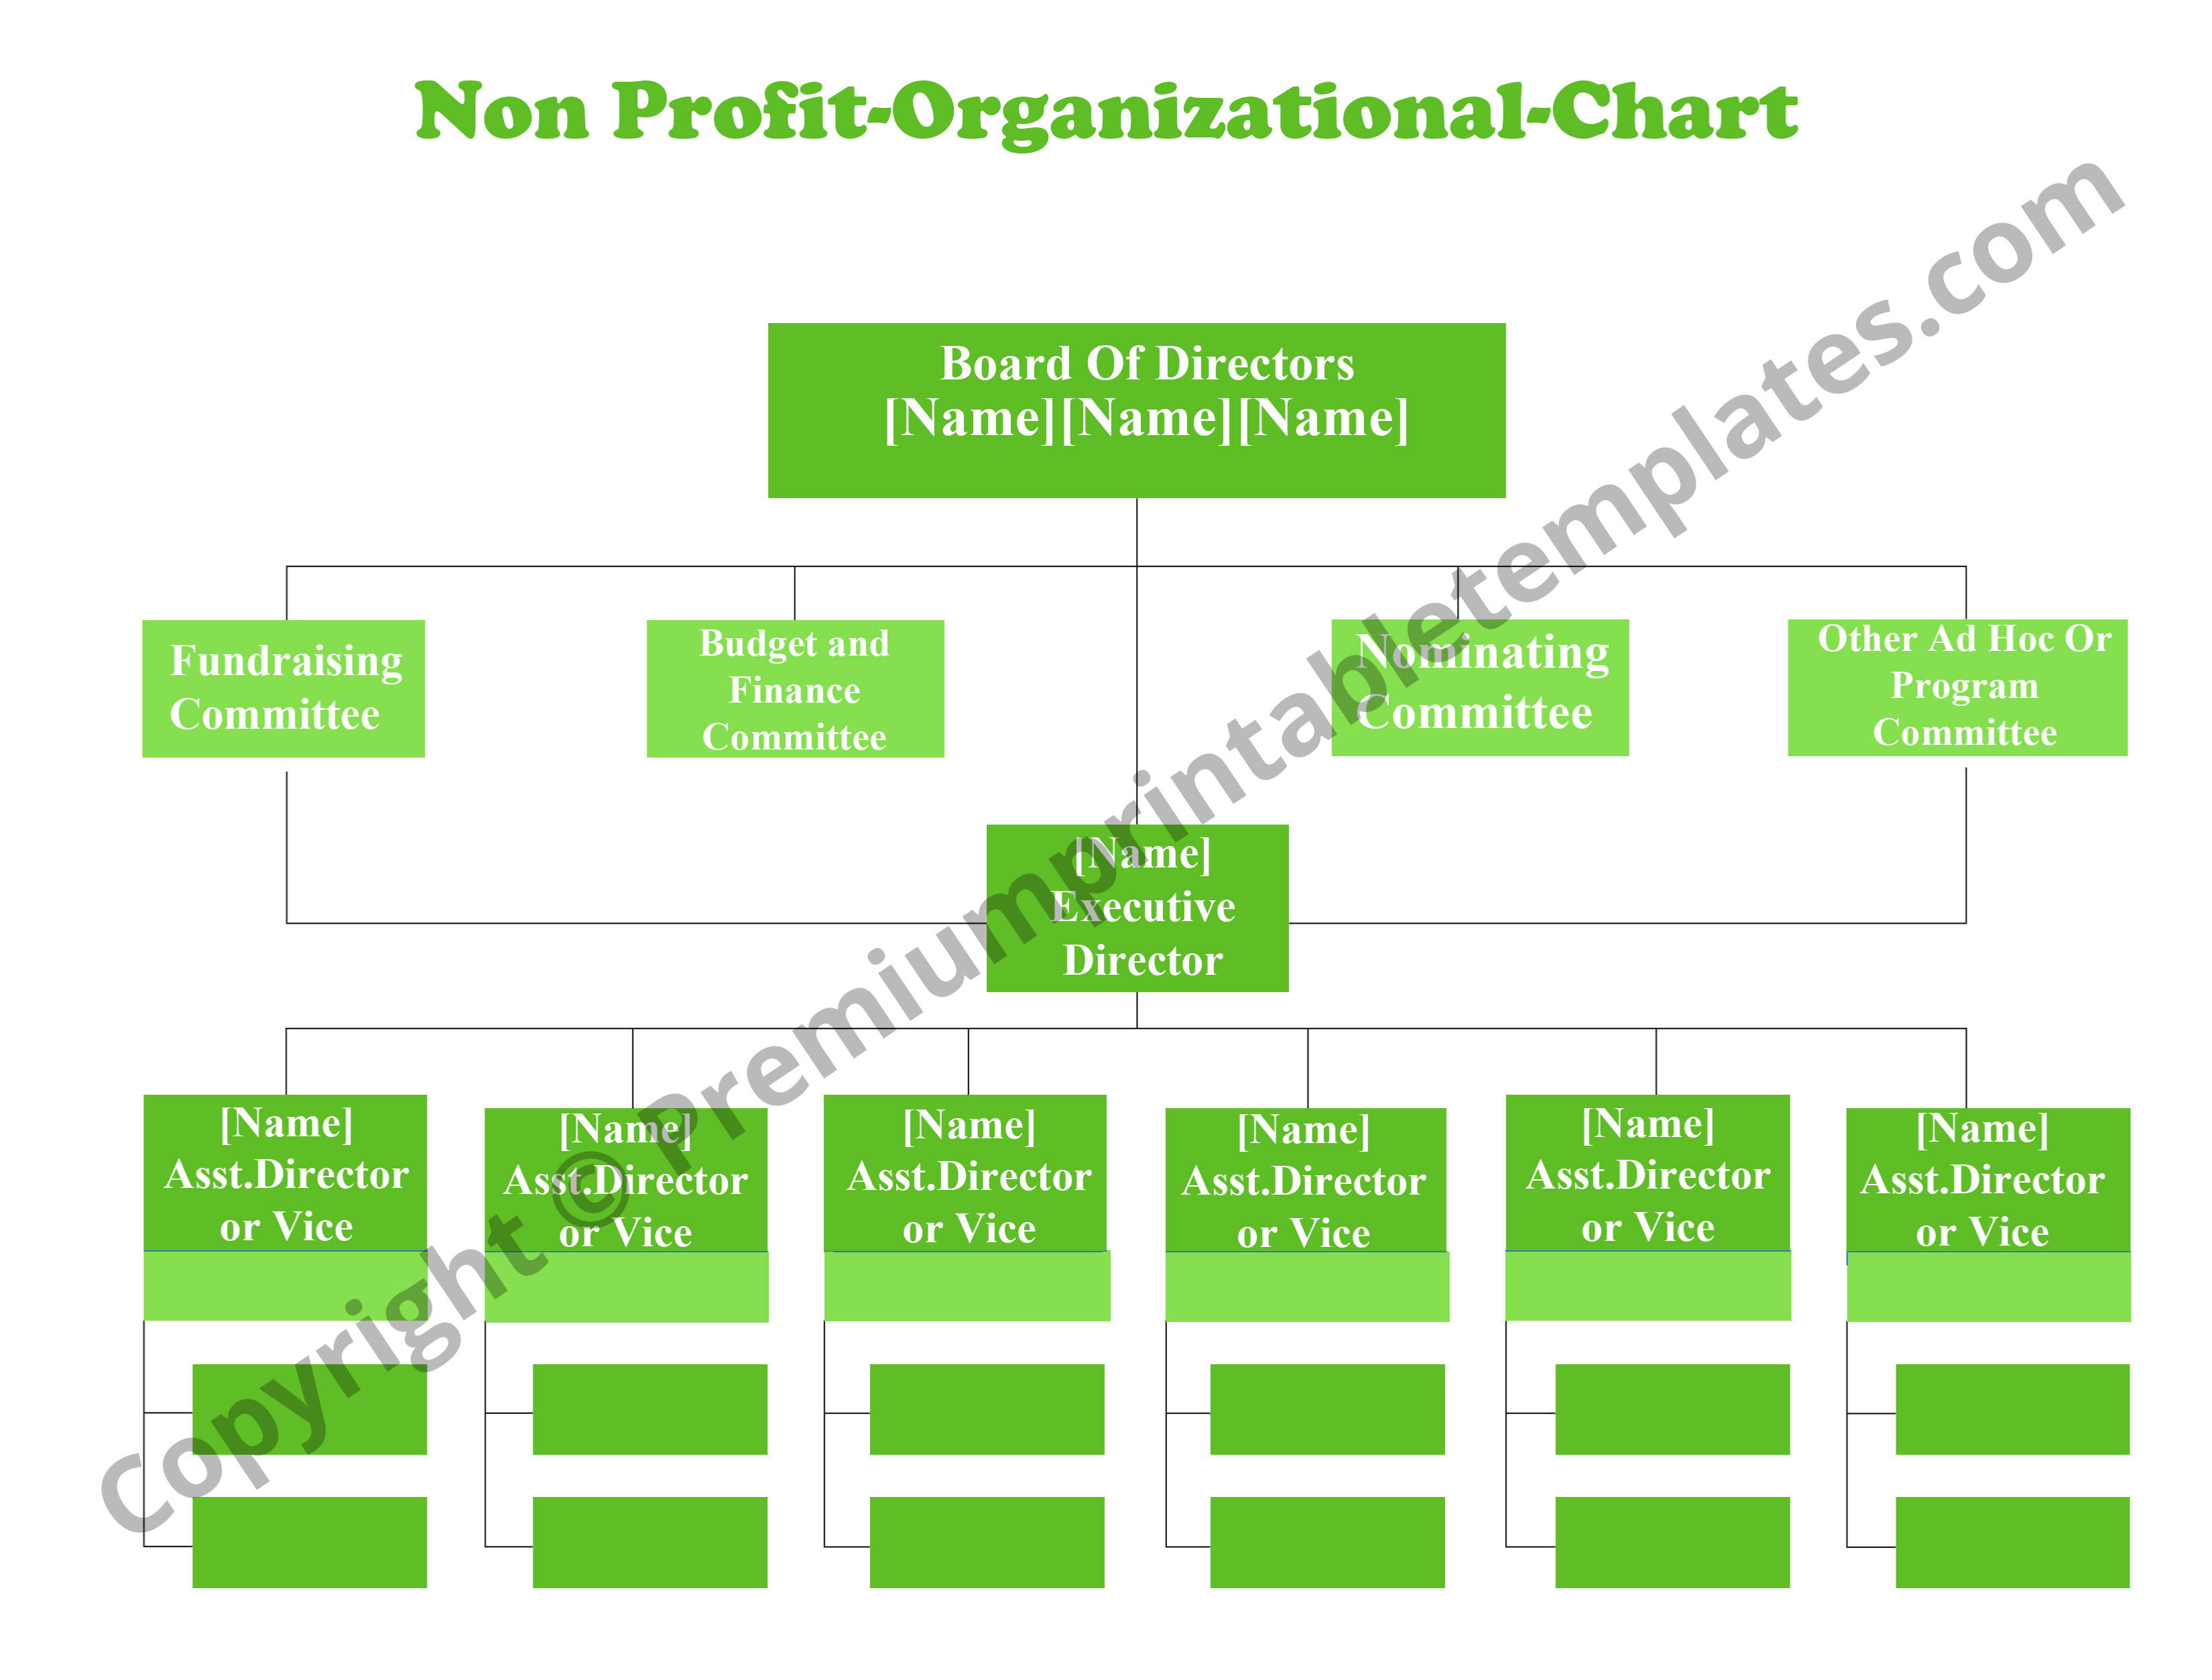 NonProfit Organizational Chart Printable Template [Pack of 5]